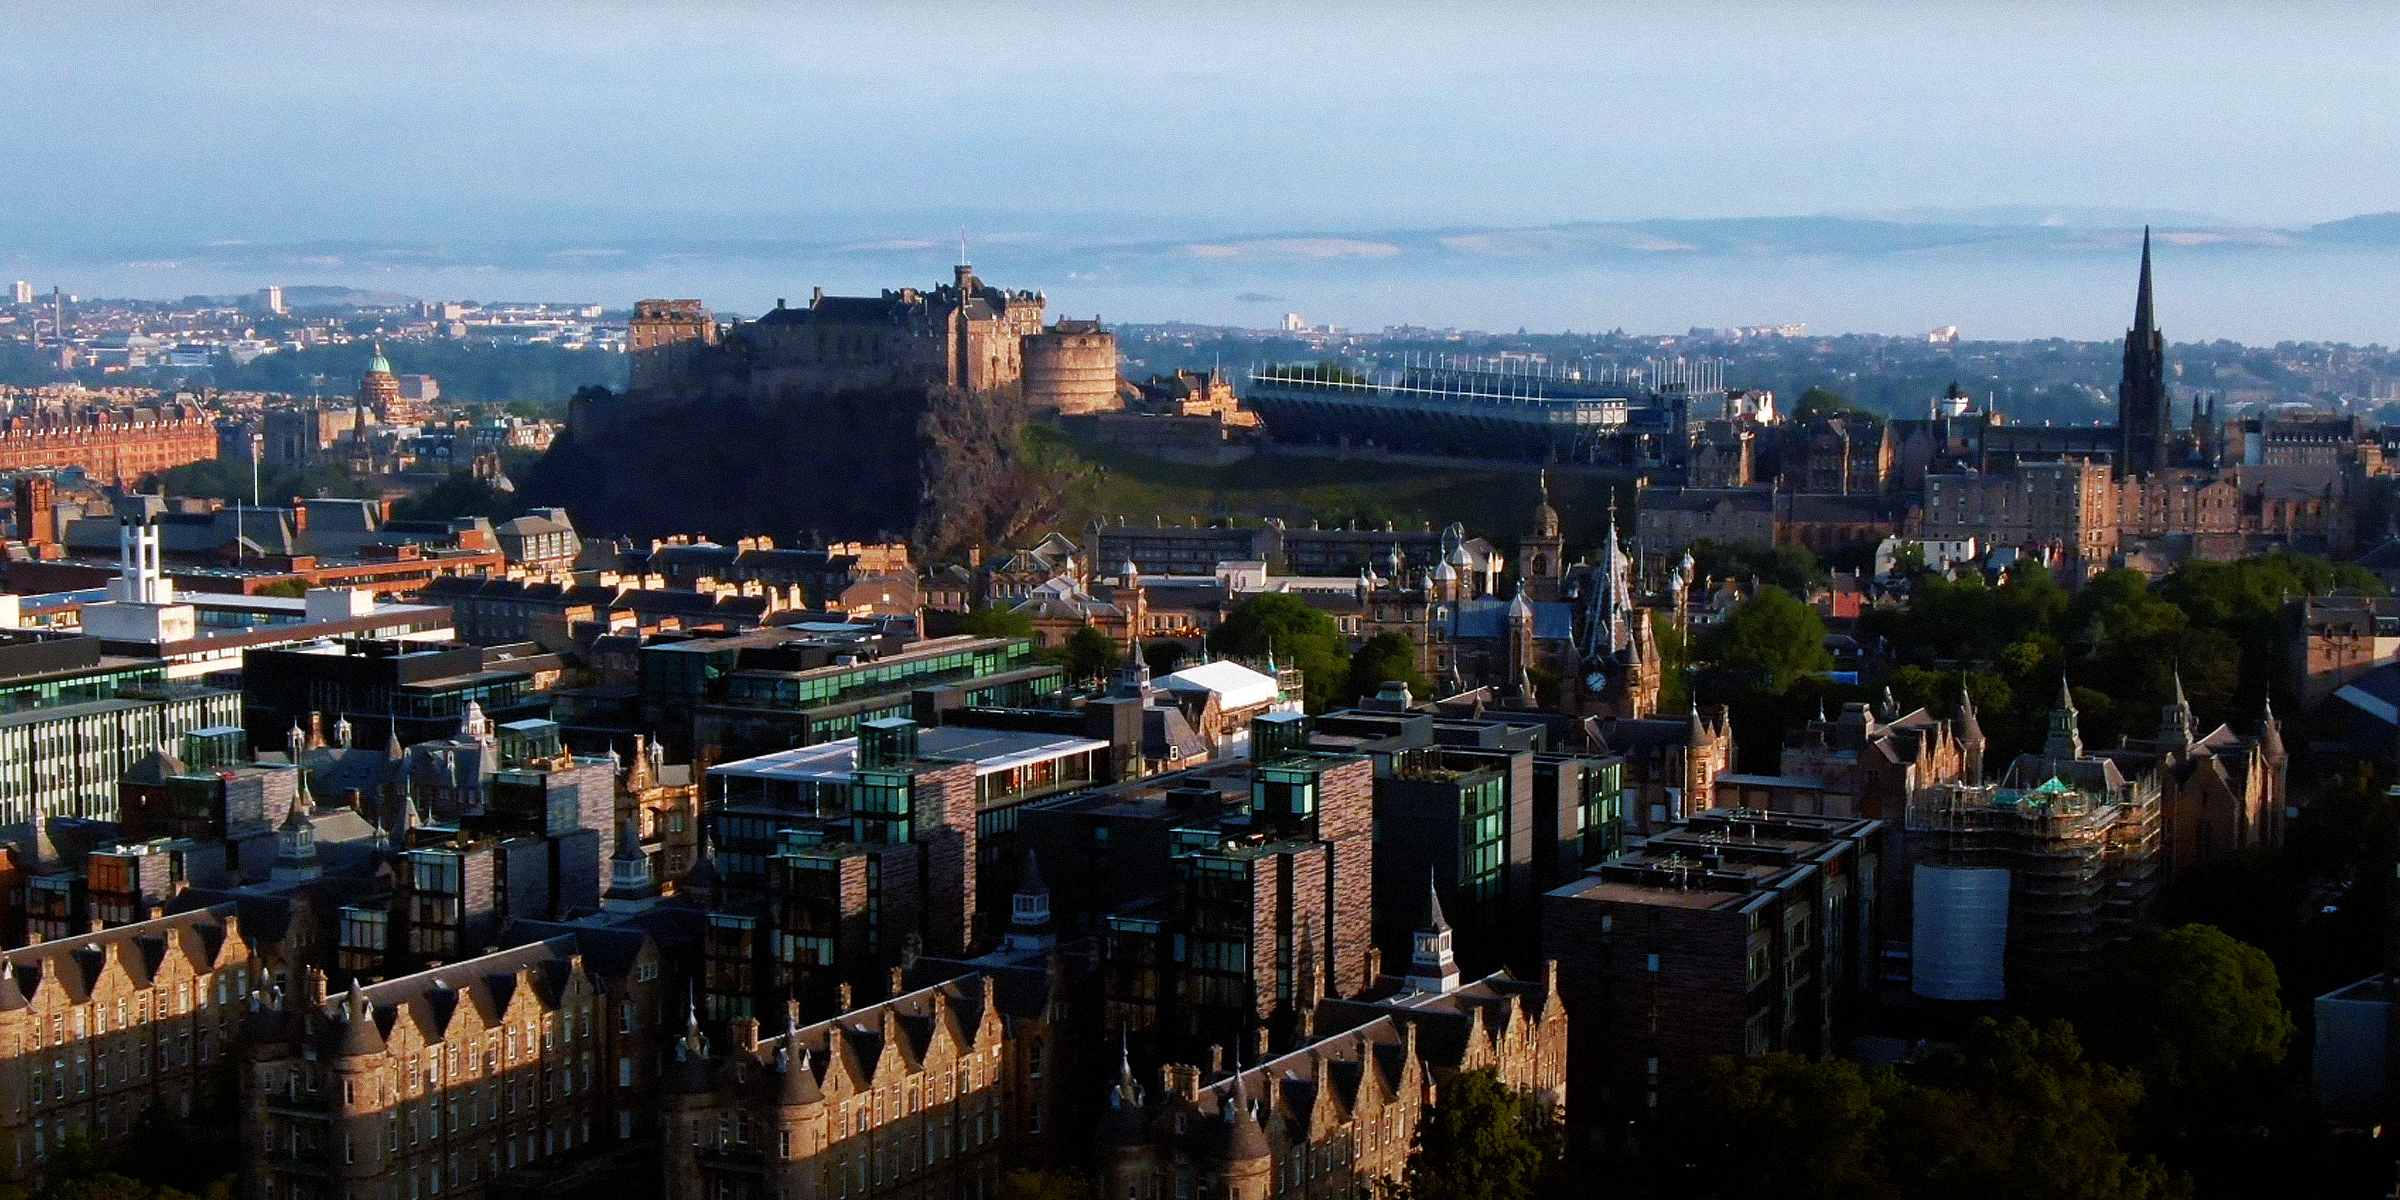 Aerial view of Edinburgh | Source: YouTube/VICVideopIC